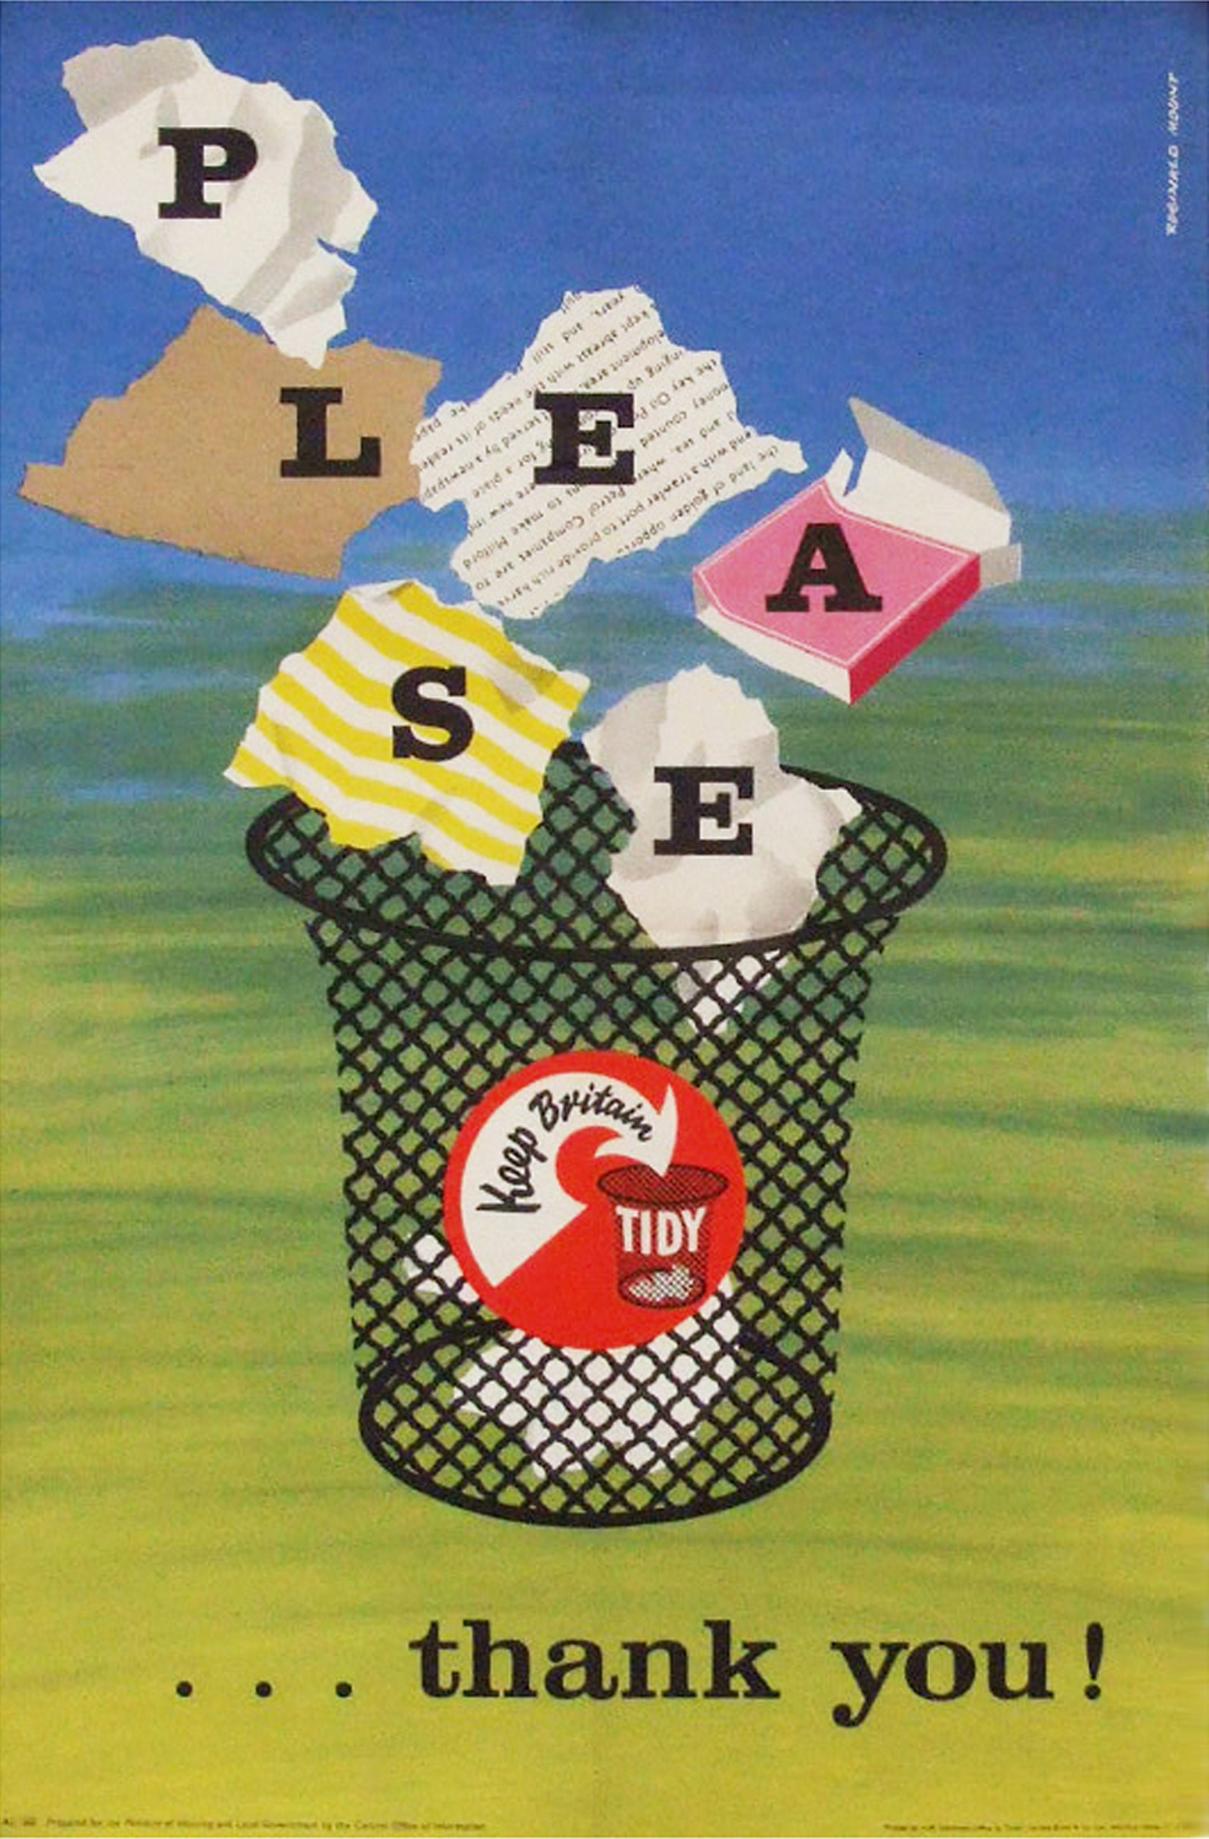 Mid-Century Modern Original 1950s Keep Britain Tidy Poster by Reginald Mount Recycle Trash For Sale